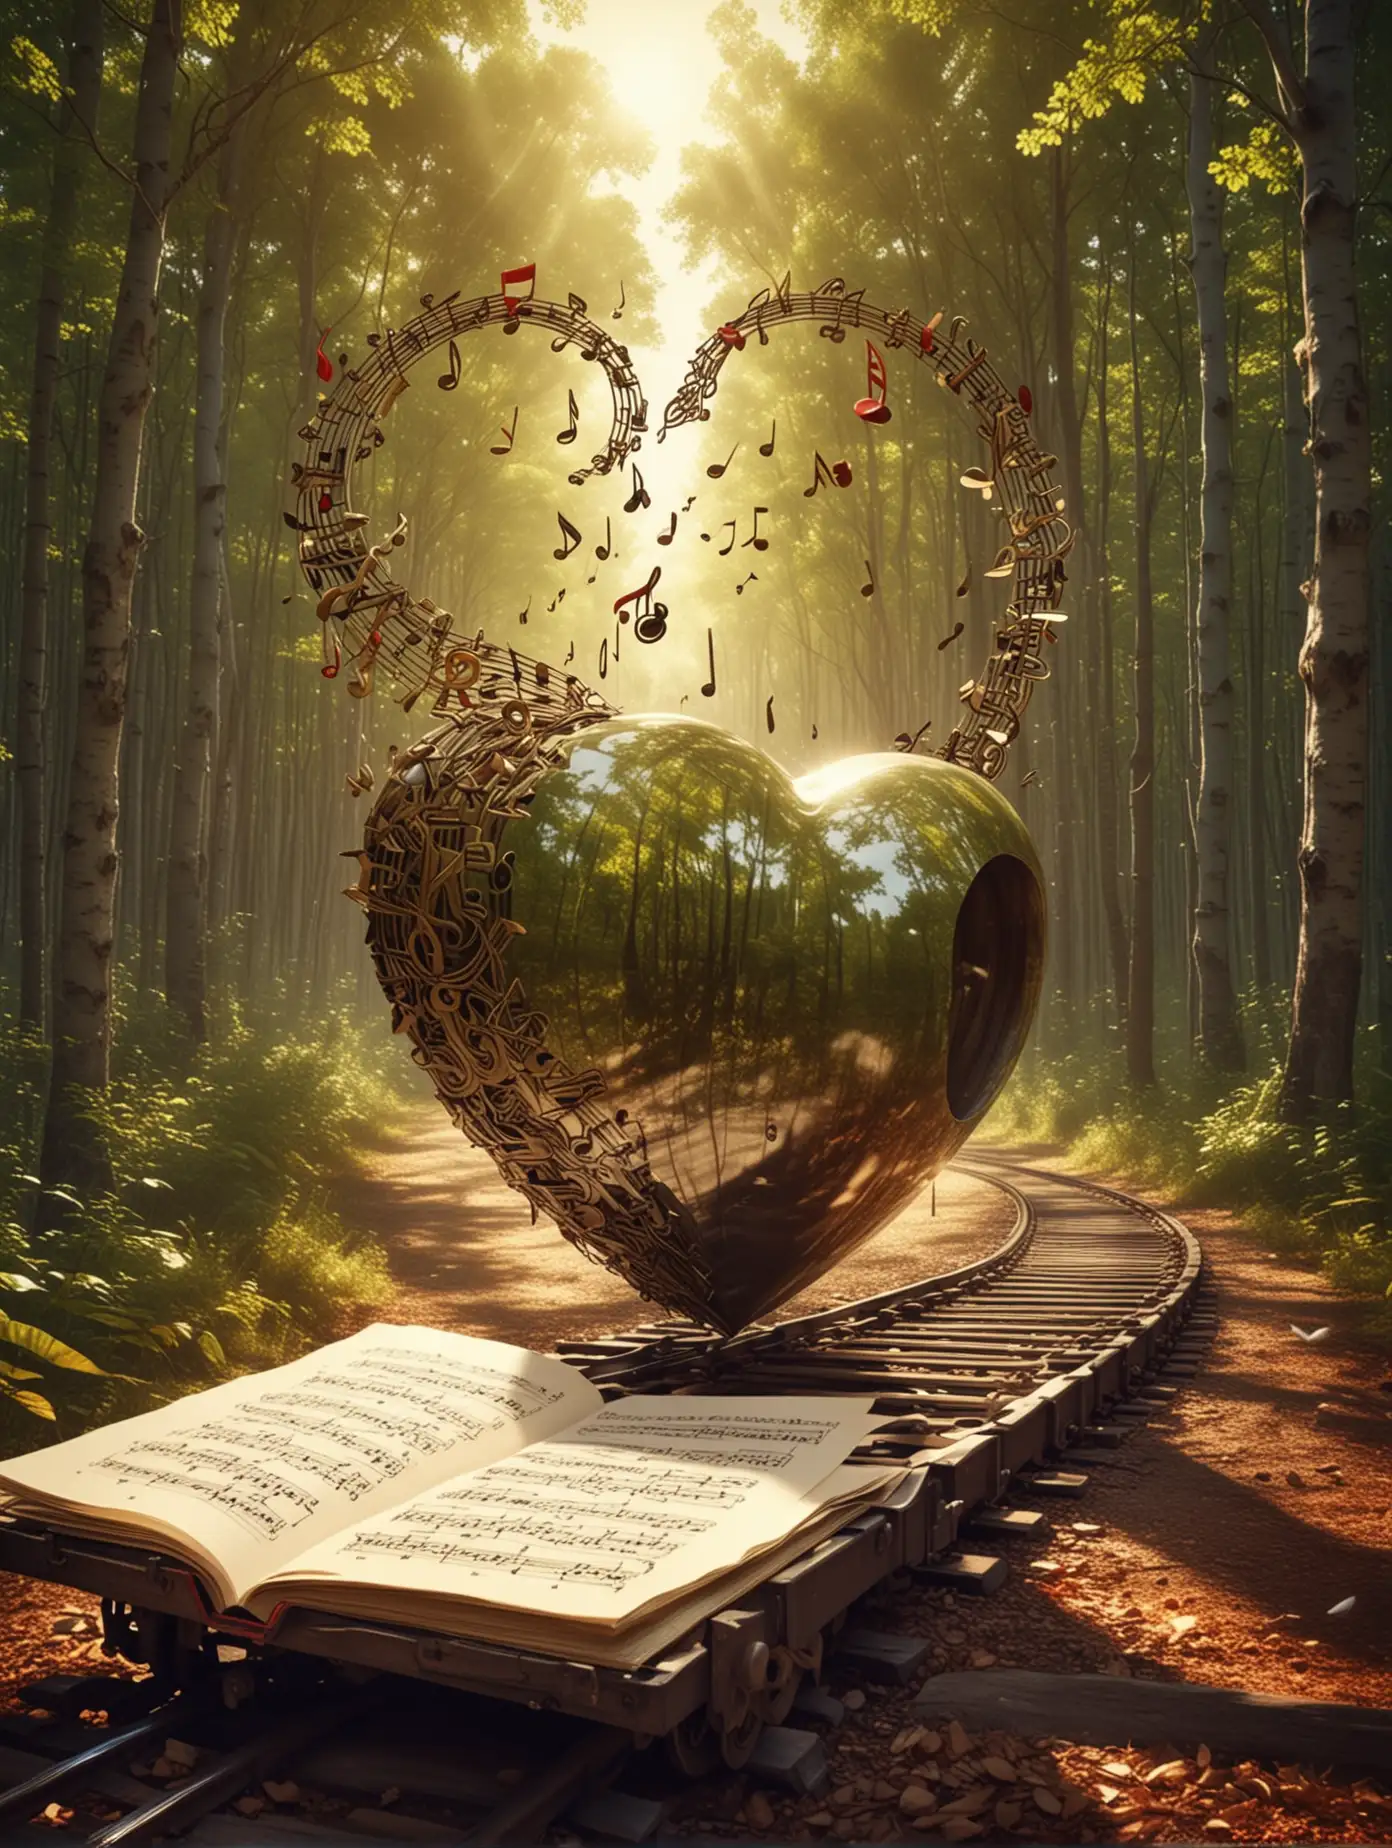 Heart Shaped Musical Train in Forest Magic Realism Art